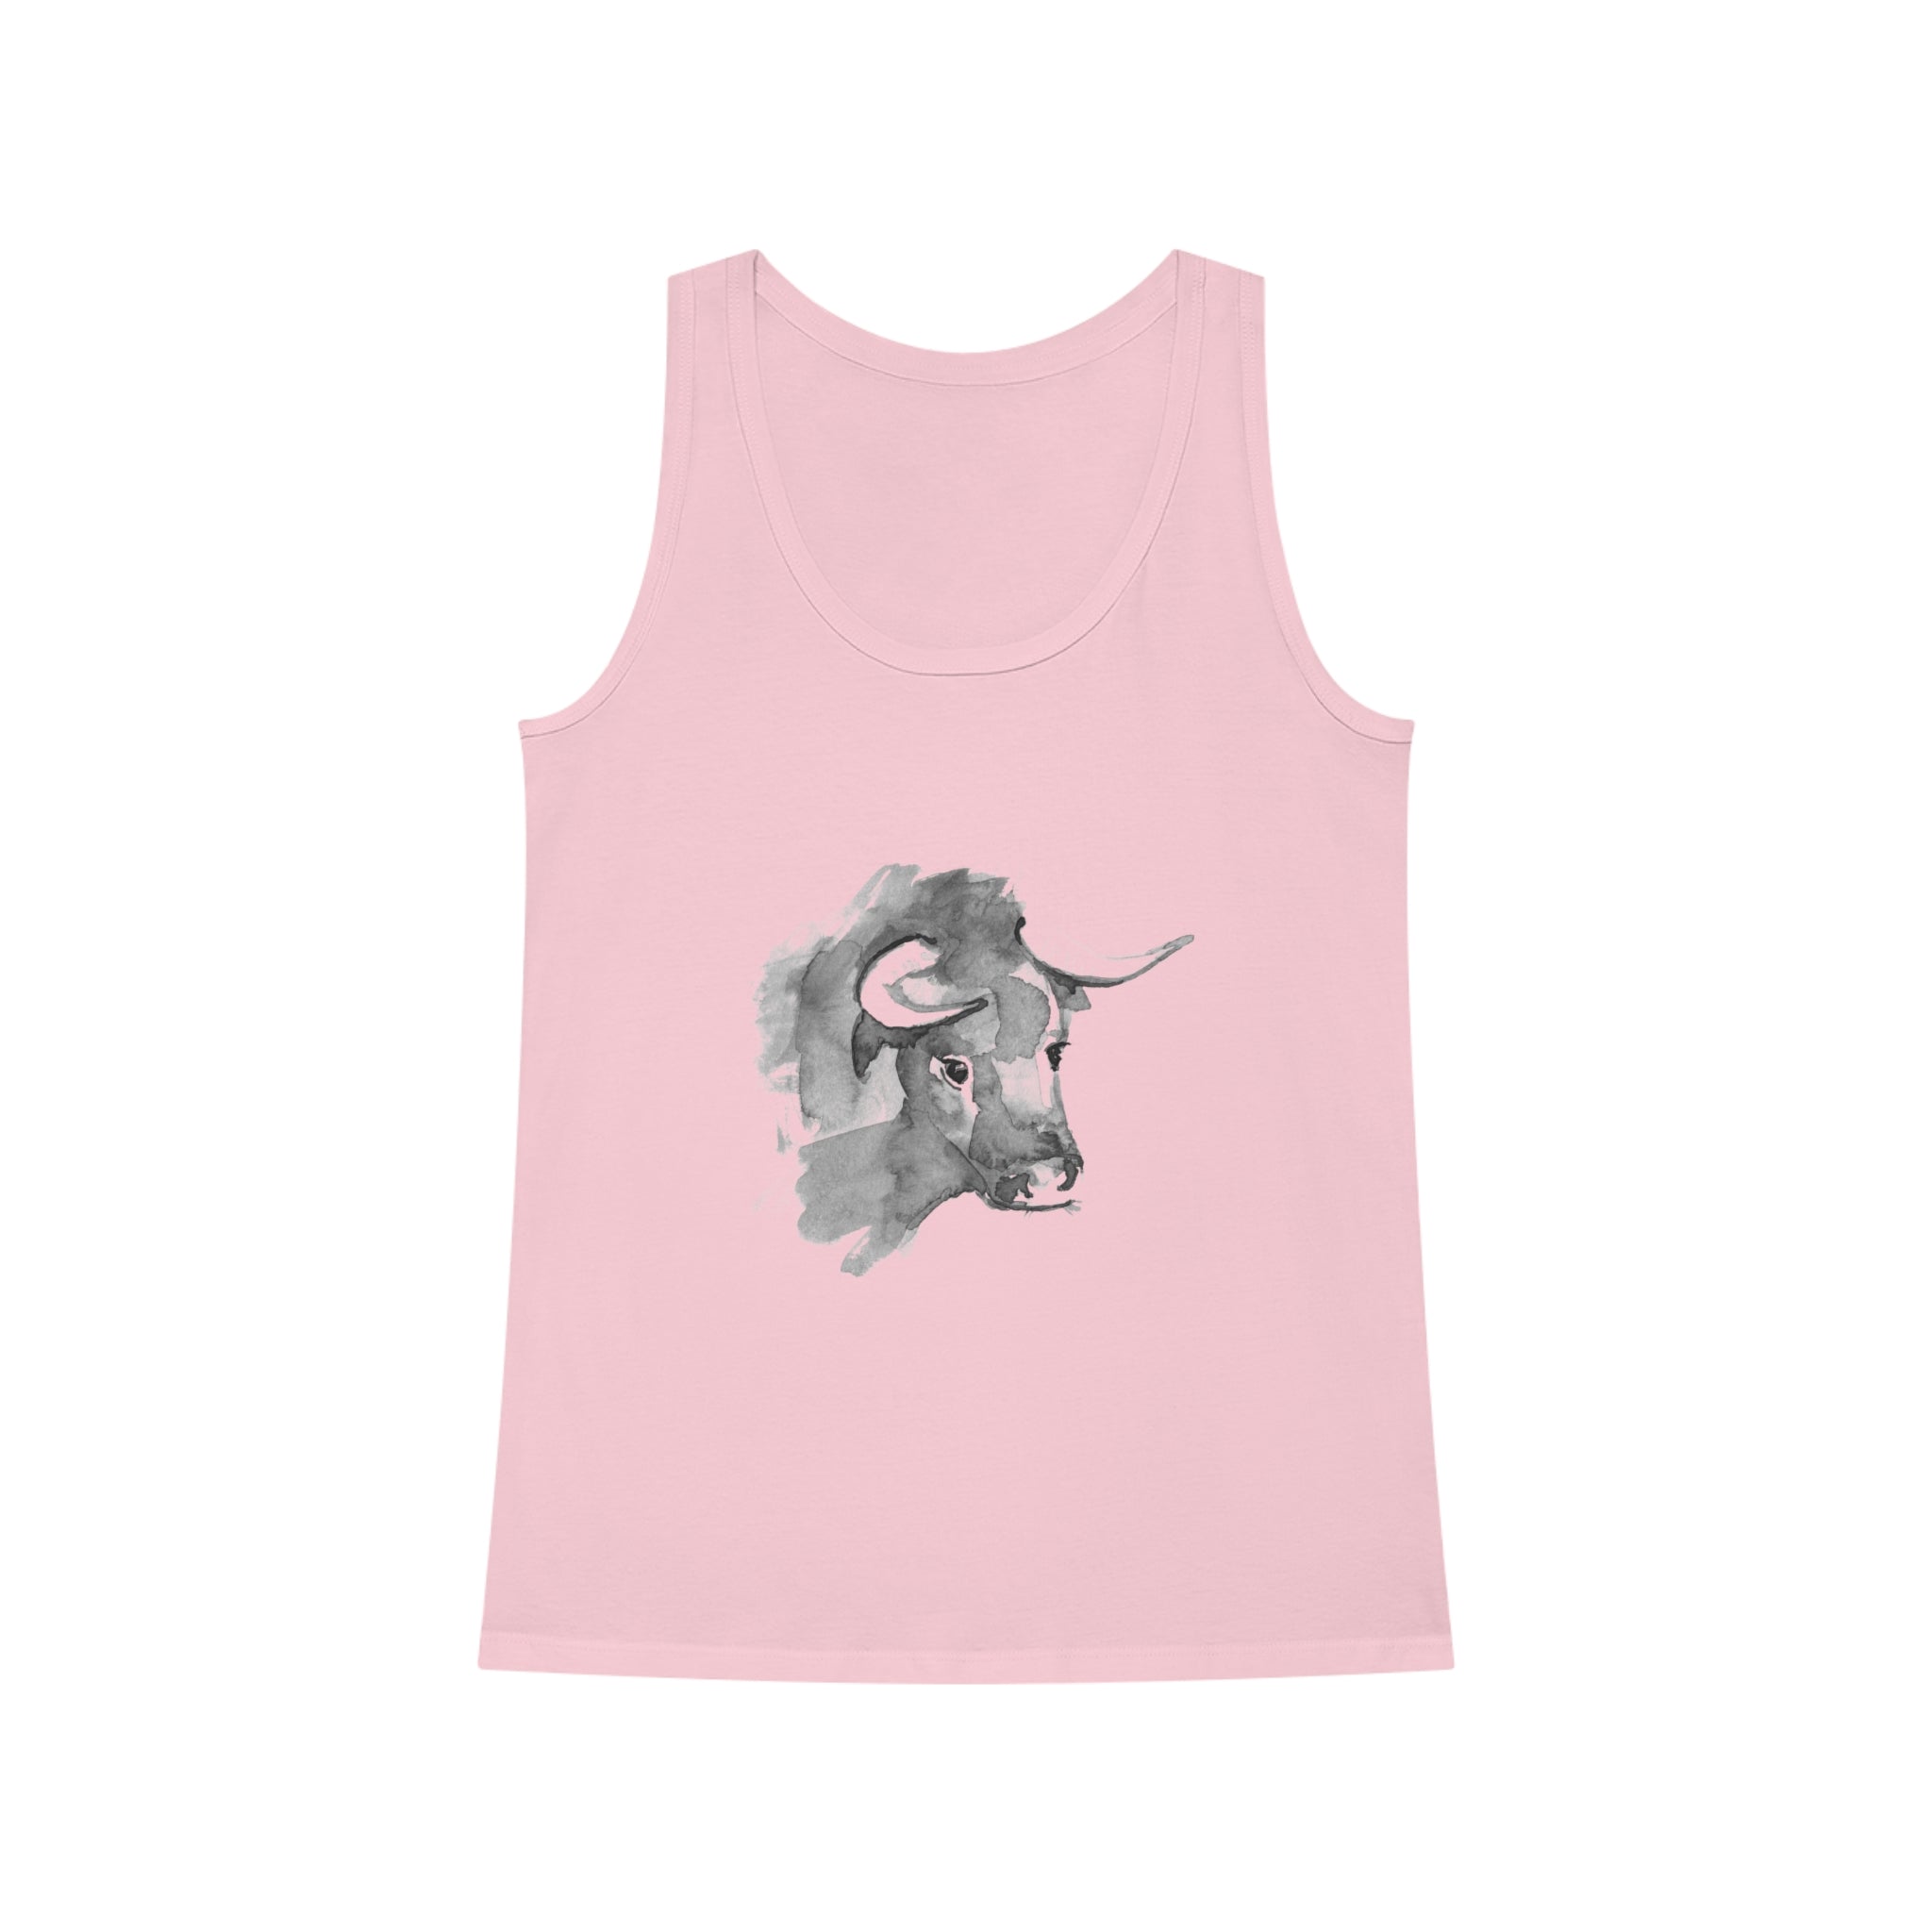 The Ox Women's Dreamer Tank Top features a bull's head on it.